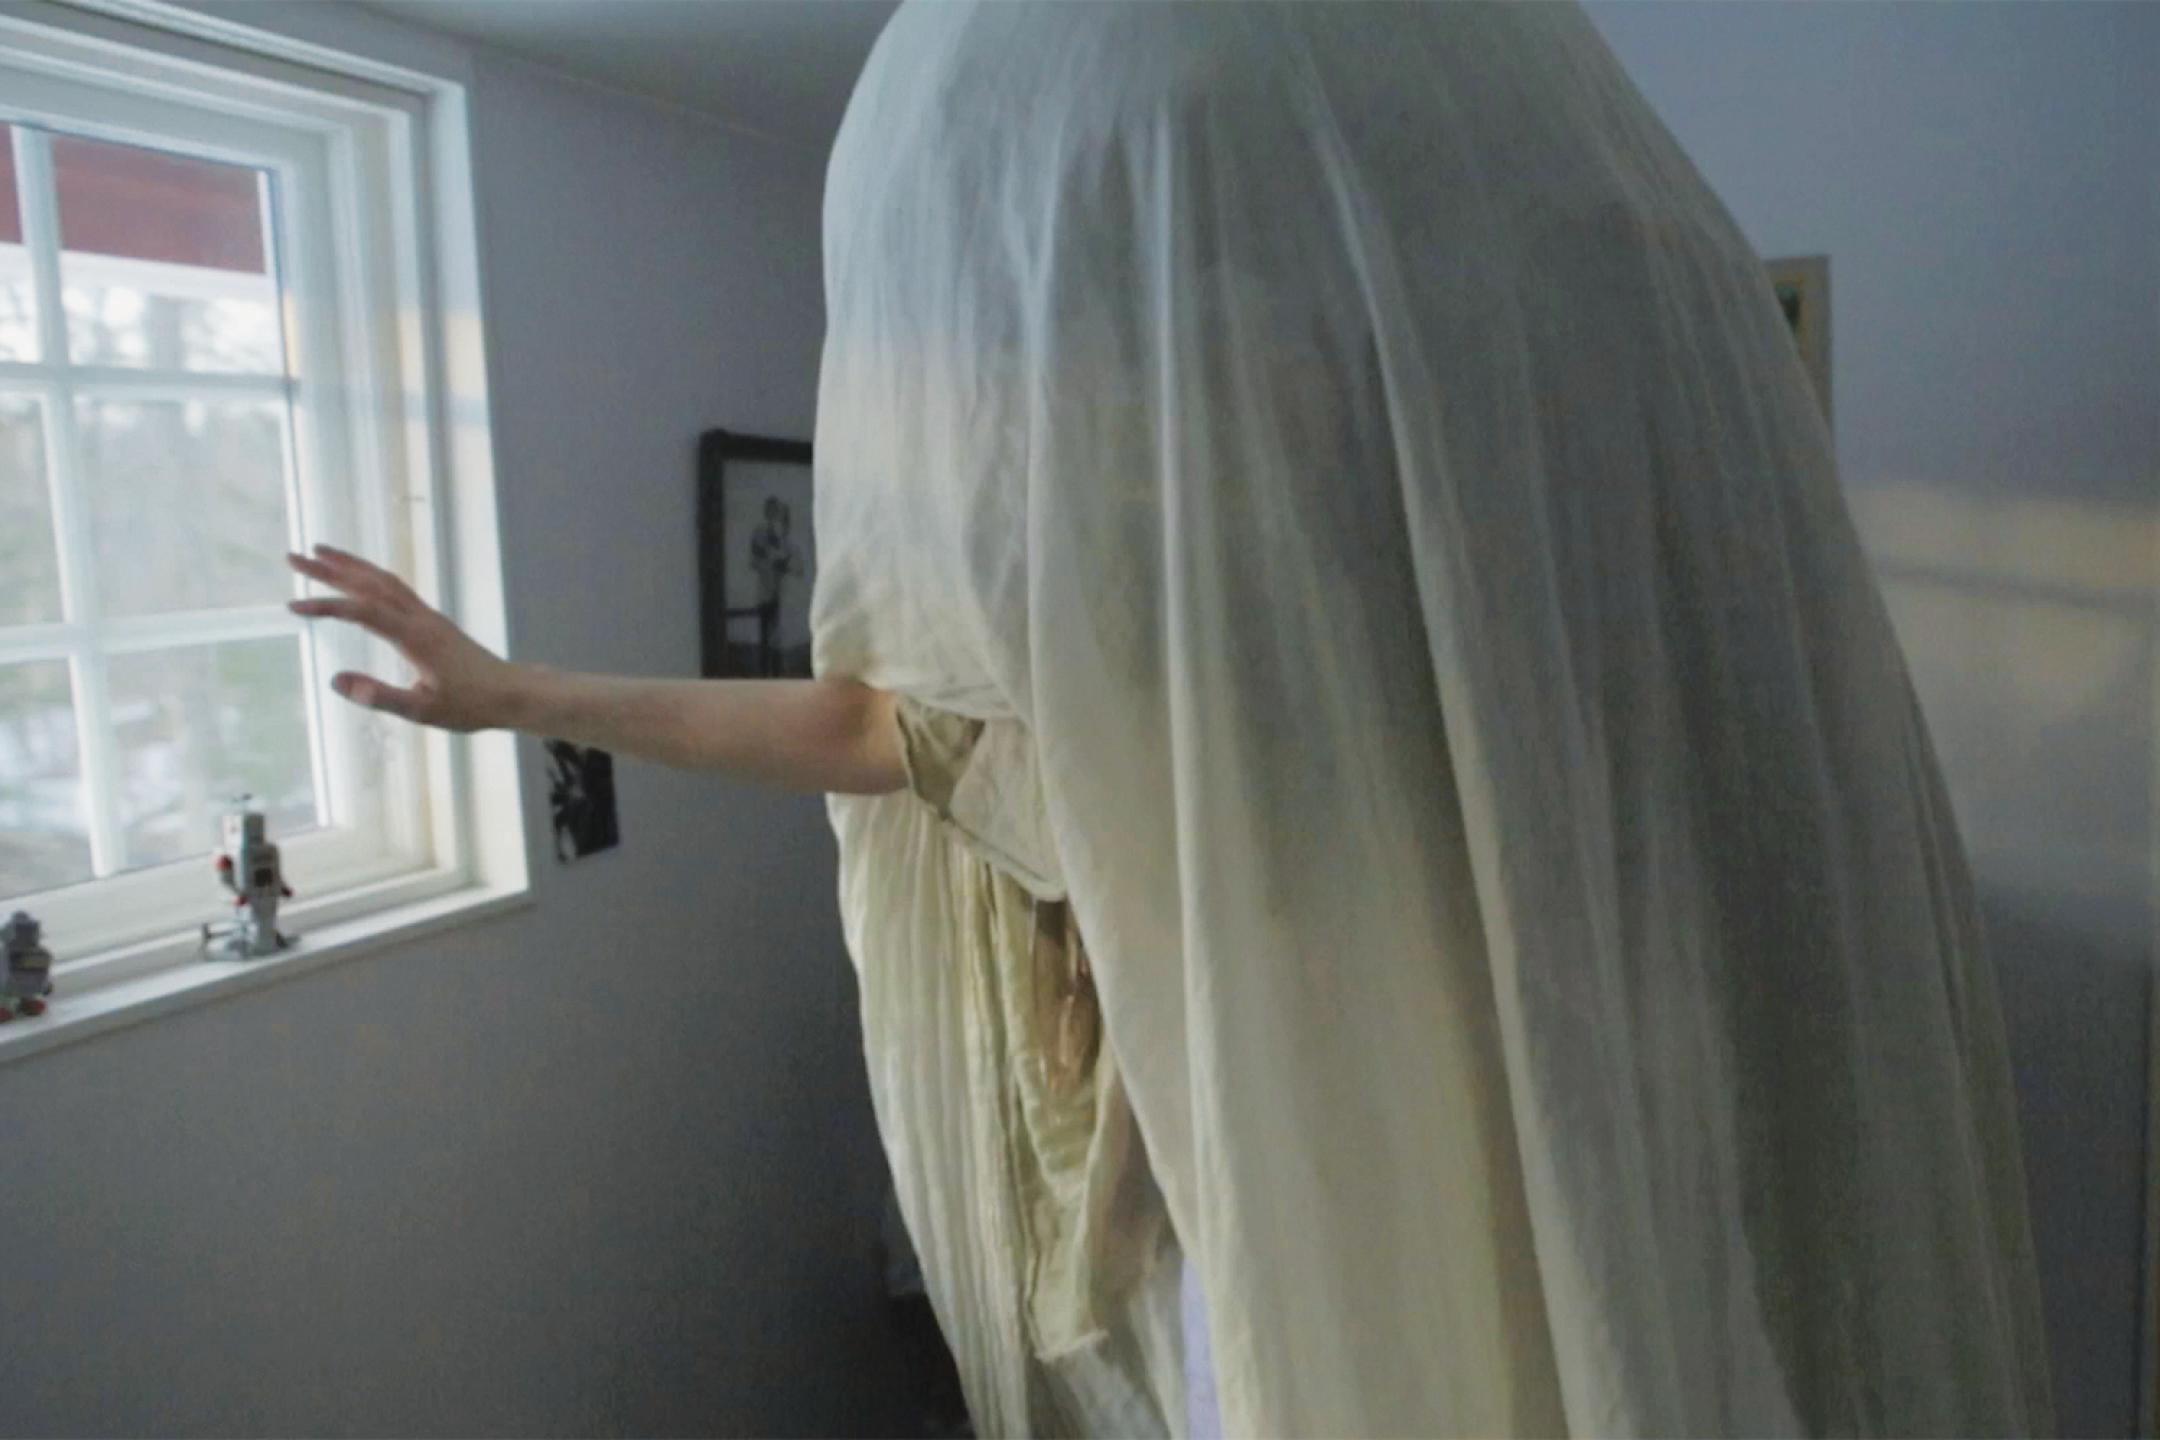 A person wrapped in many layers of white fabric stands in the middle of a living room. Only the persons arms is visible, pointing out of the fabric in direction of the window.